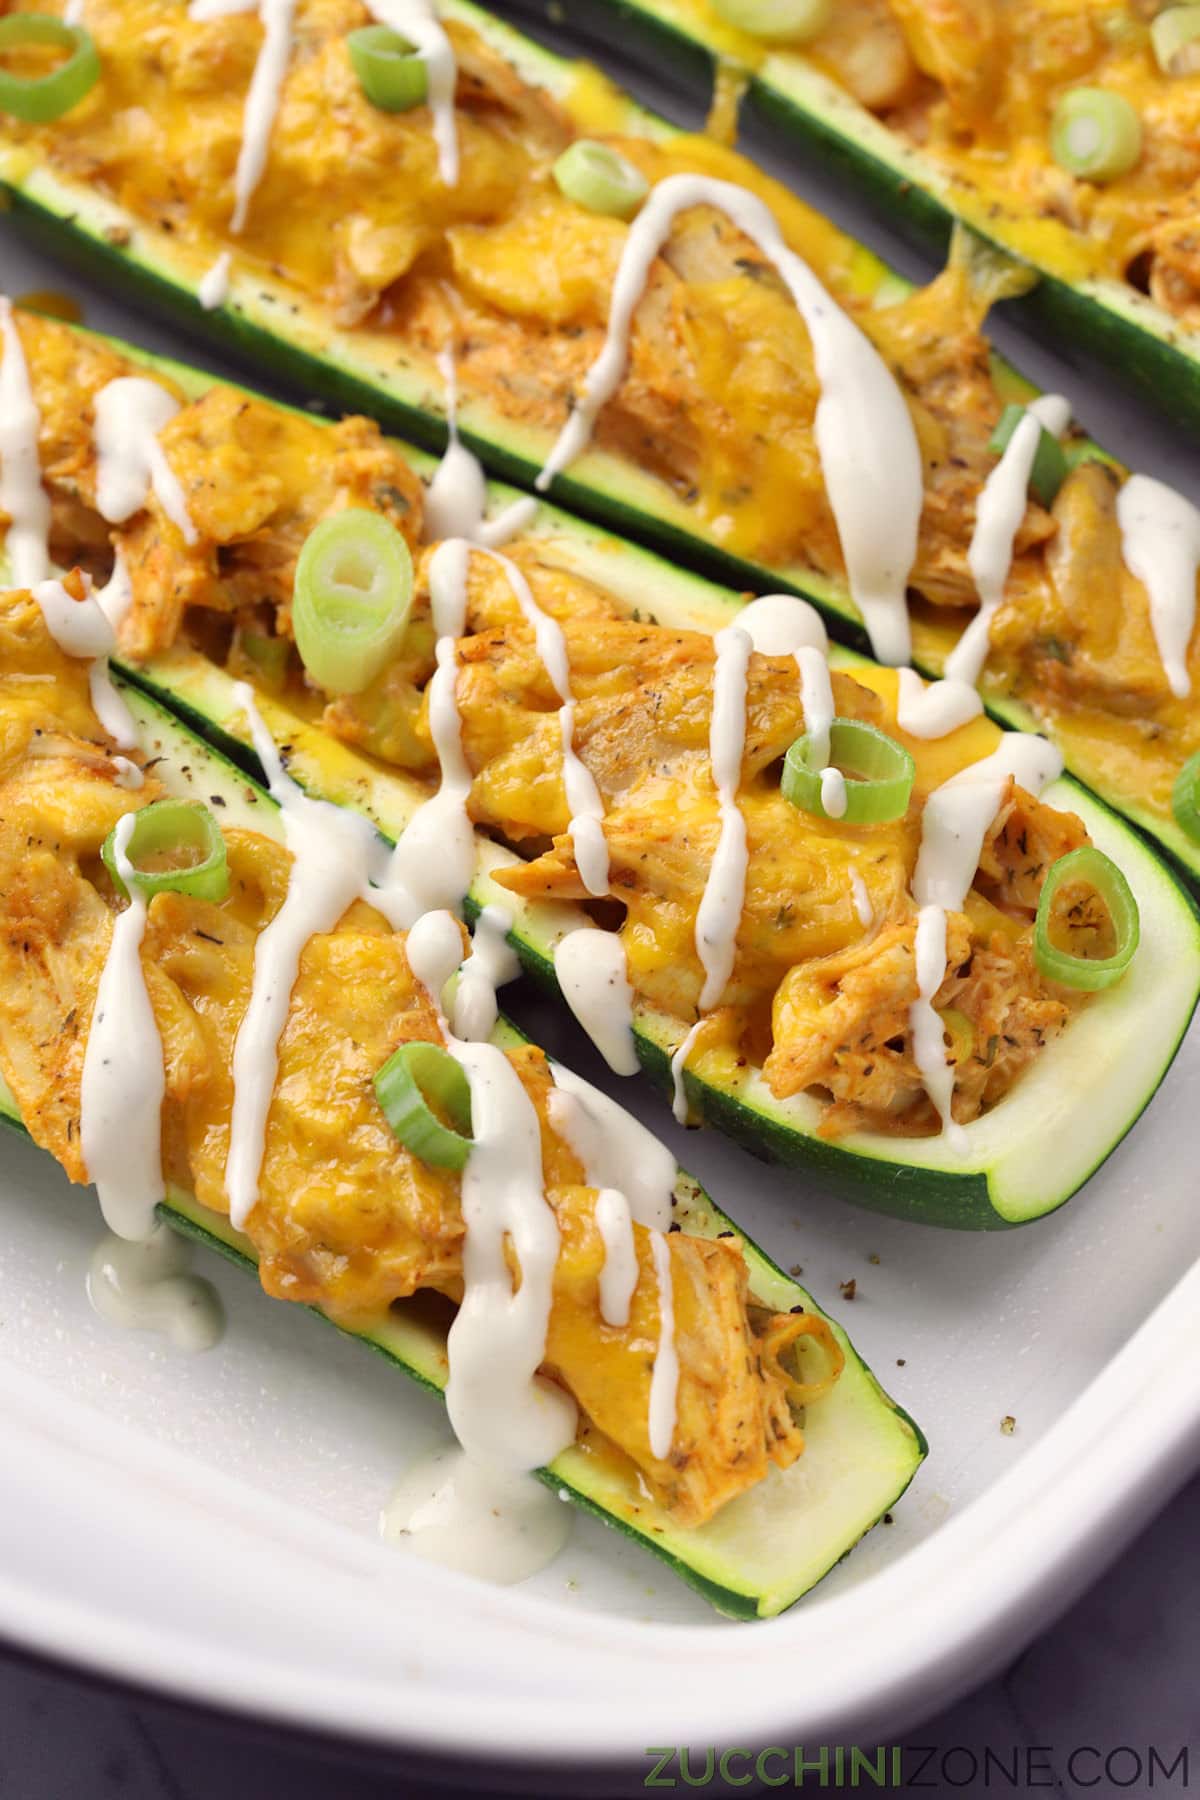 Buffalo chicken zucchini boats drizzled with ranch dressing in a white casserole dish.